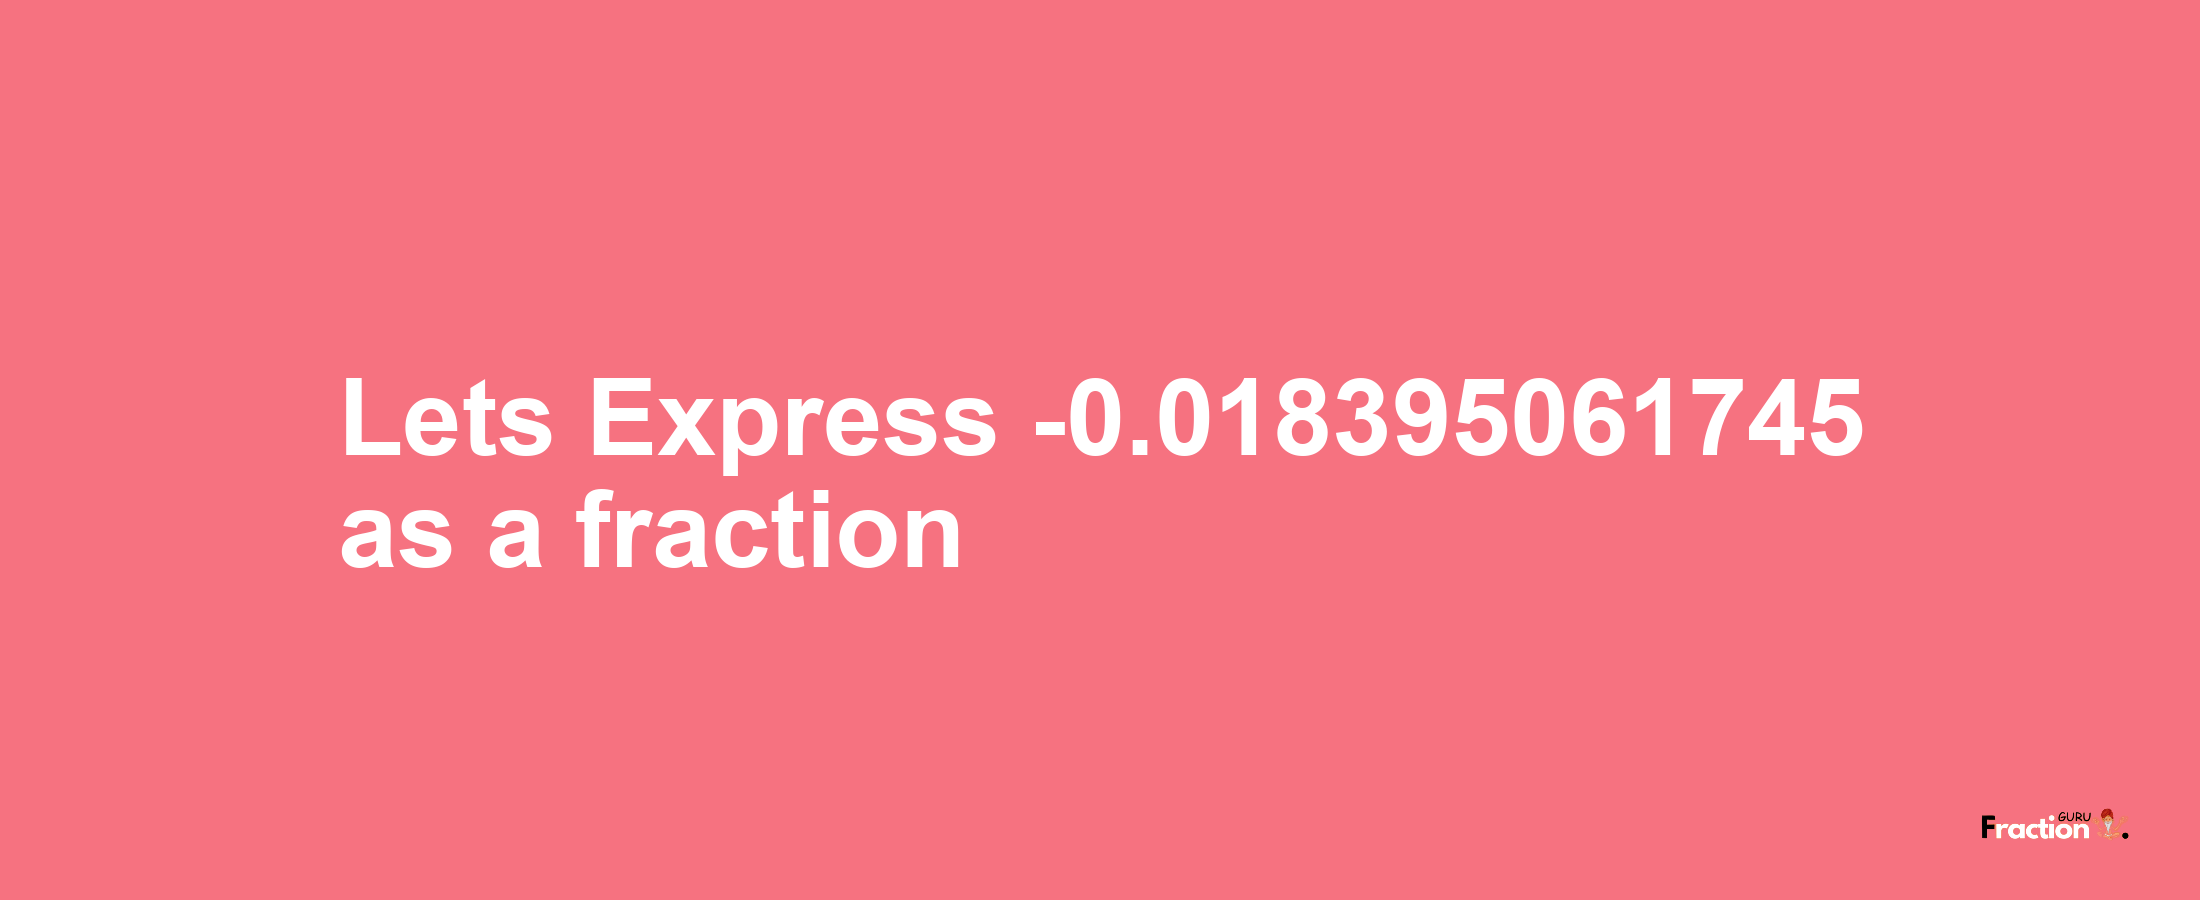 Lets Express -0.018395061745 as afraction